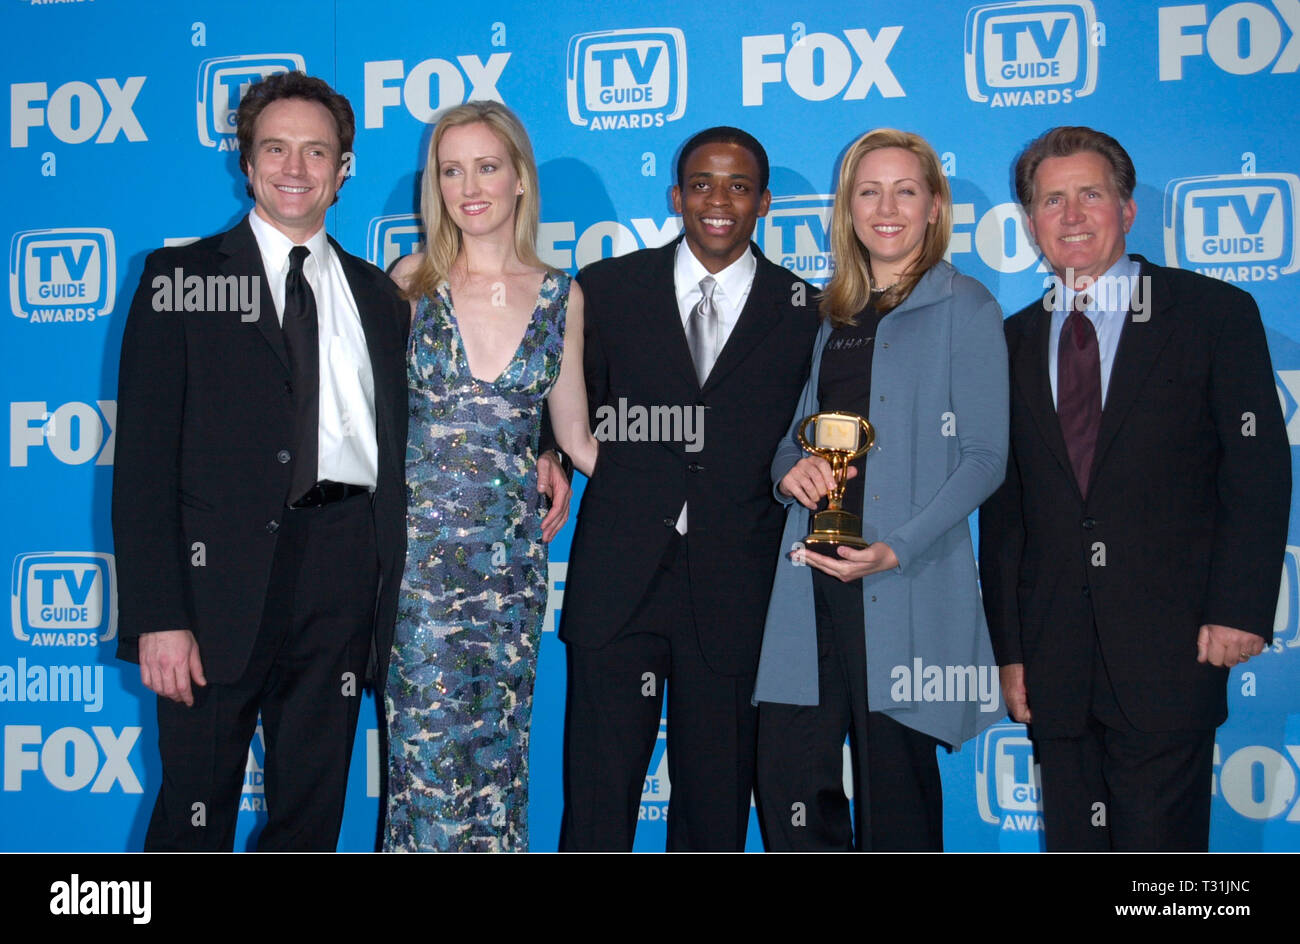 LOS ANGELES, CA. February 24, 2001: The West Wing stars BRADLEY WHITFORD  (left), JANEL MOLONEY, DULE HILL & MARTIN SHEEN with Sheen's daughter RENEE  ESTEVEZ at the 3rd Annual TV Guide Awards